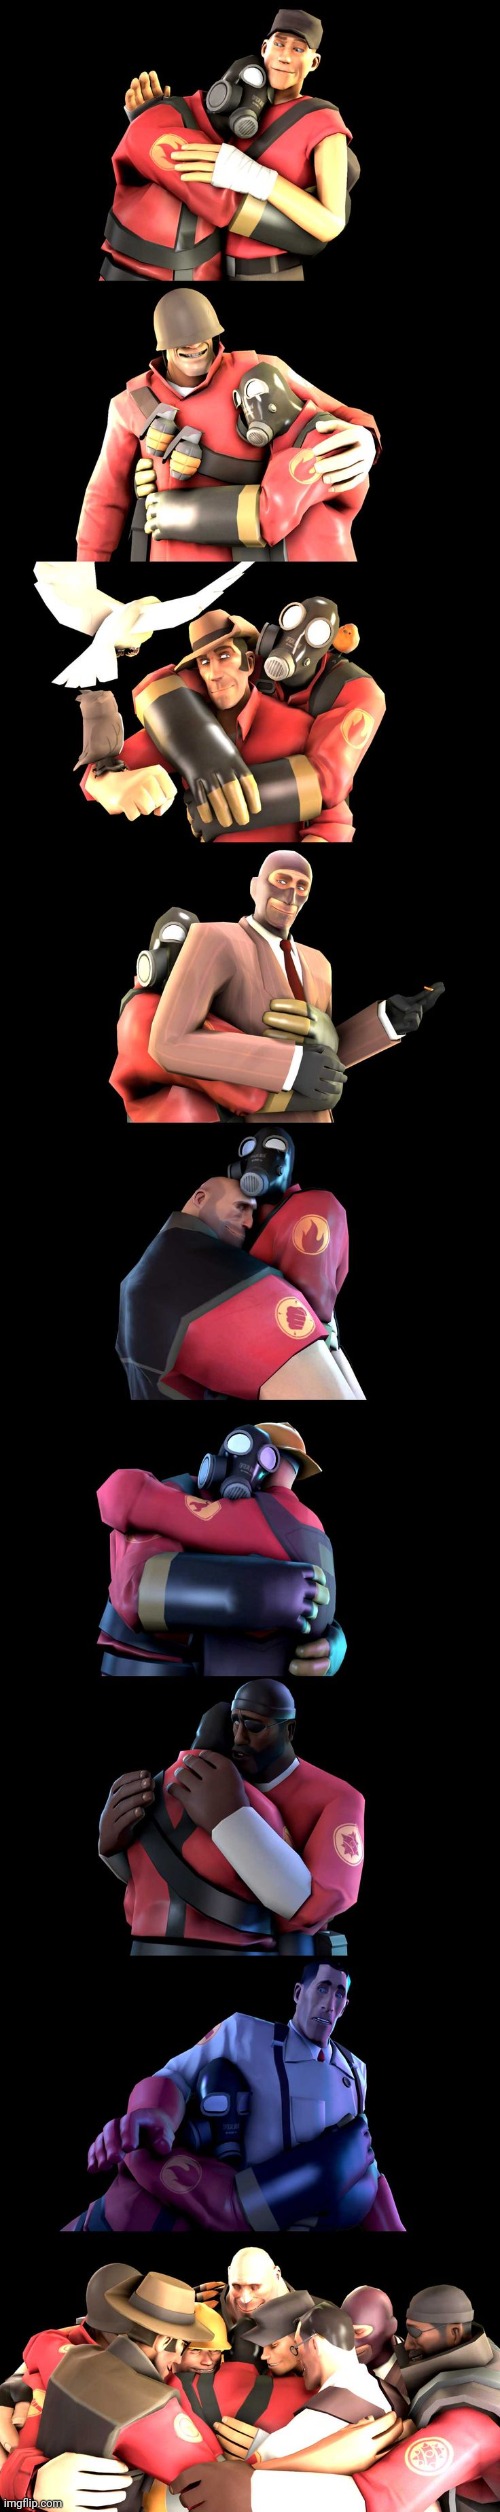 image tagged in team fortress 2,tf2,game,wholesome,valve,cartoon | made w/ Imgflip meme maker